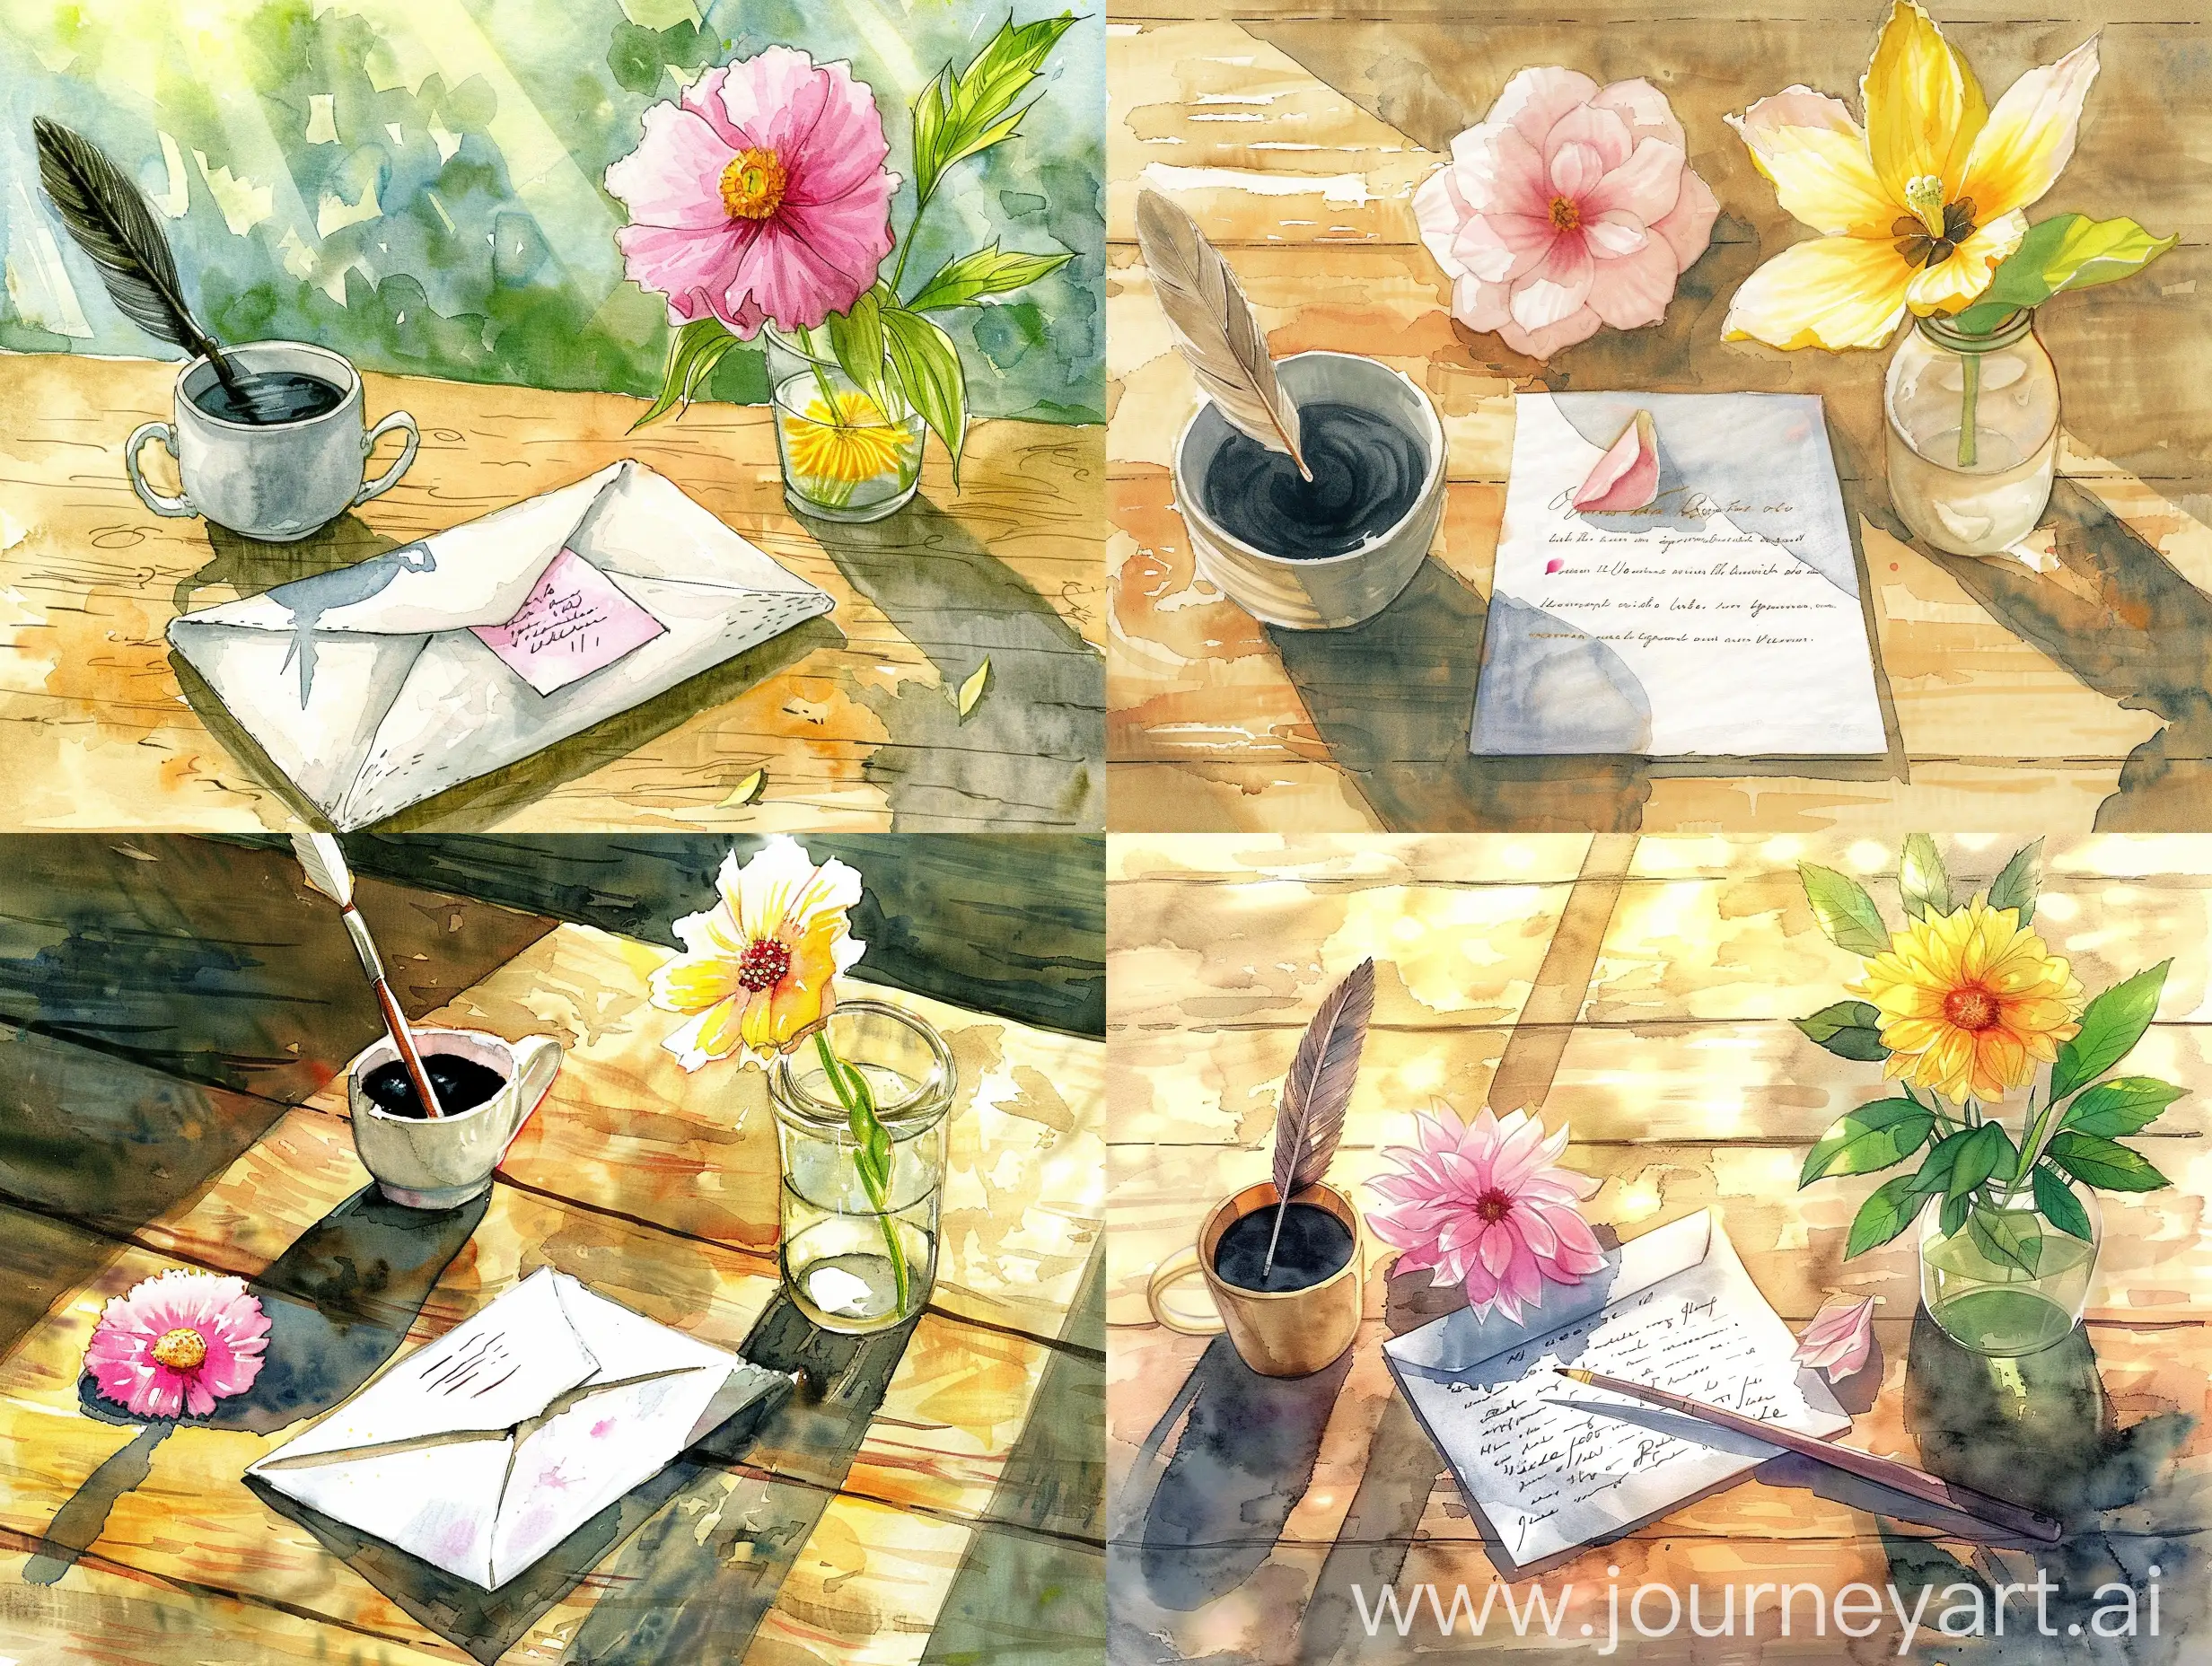 Anime style, a letter placed on a wooden table, with a pink flower on it.  Next to that letter is a cup of black ink with a quill used as a pen.  On the other side of the table there is a cup full of water with a yellow flower in it.  Watercolor, high quality, sunlight.